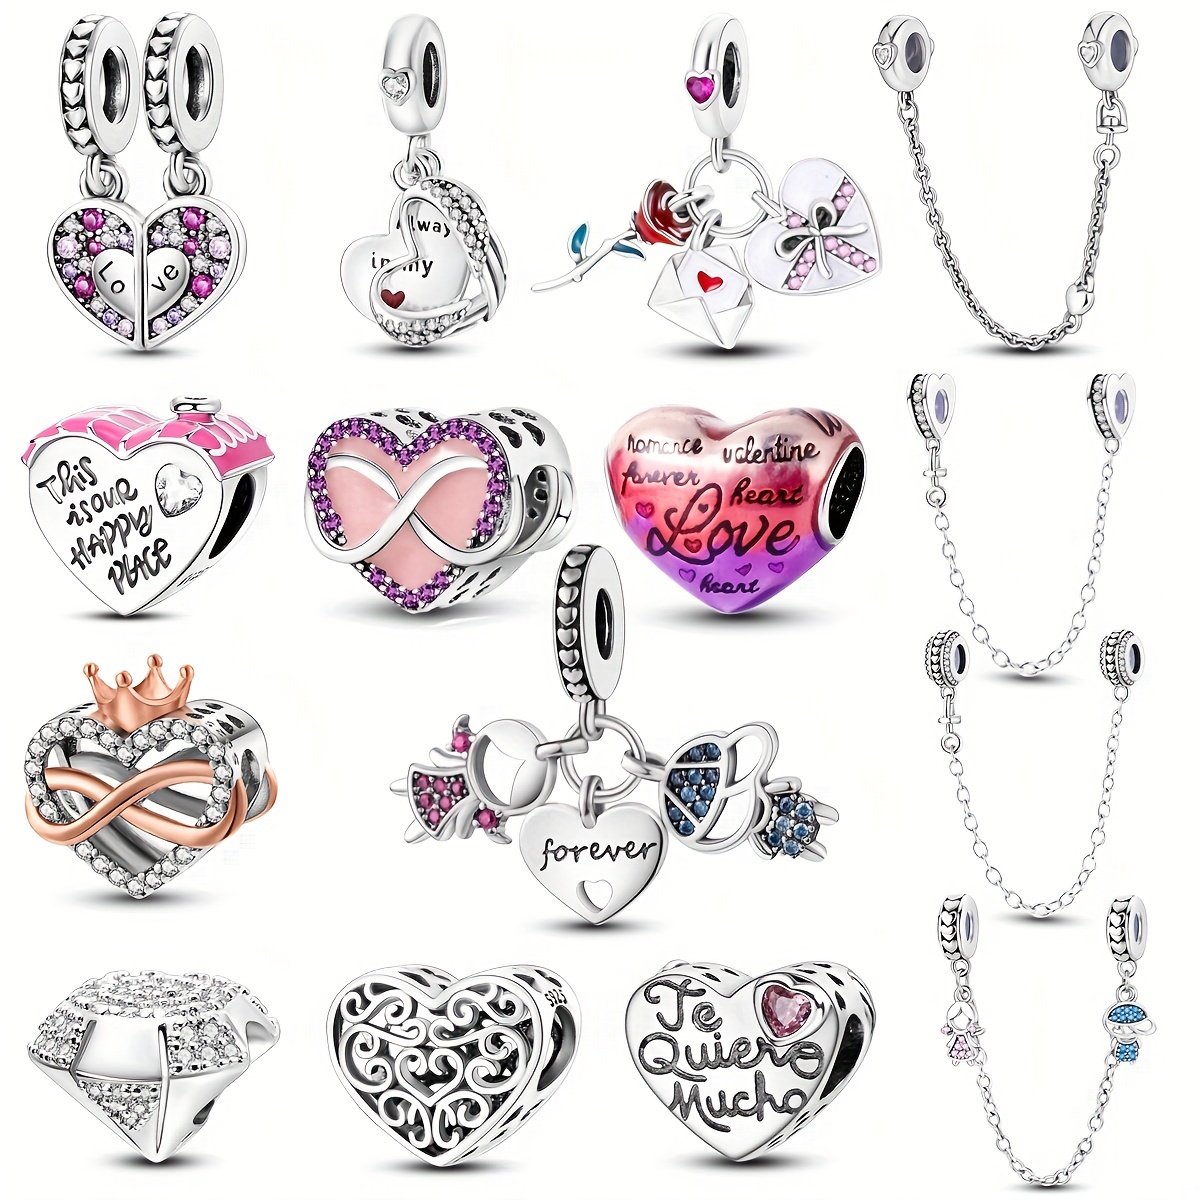 xinqinghao 30 pc heart shape charms bling charms for jewelry